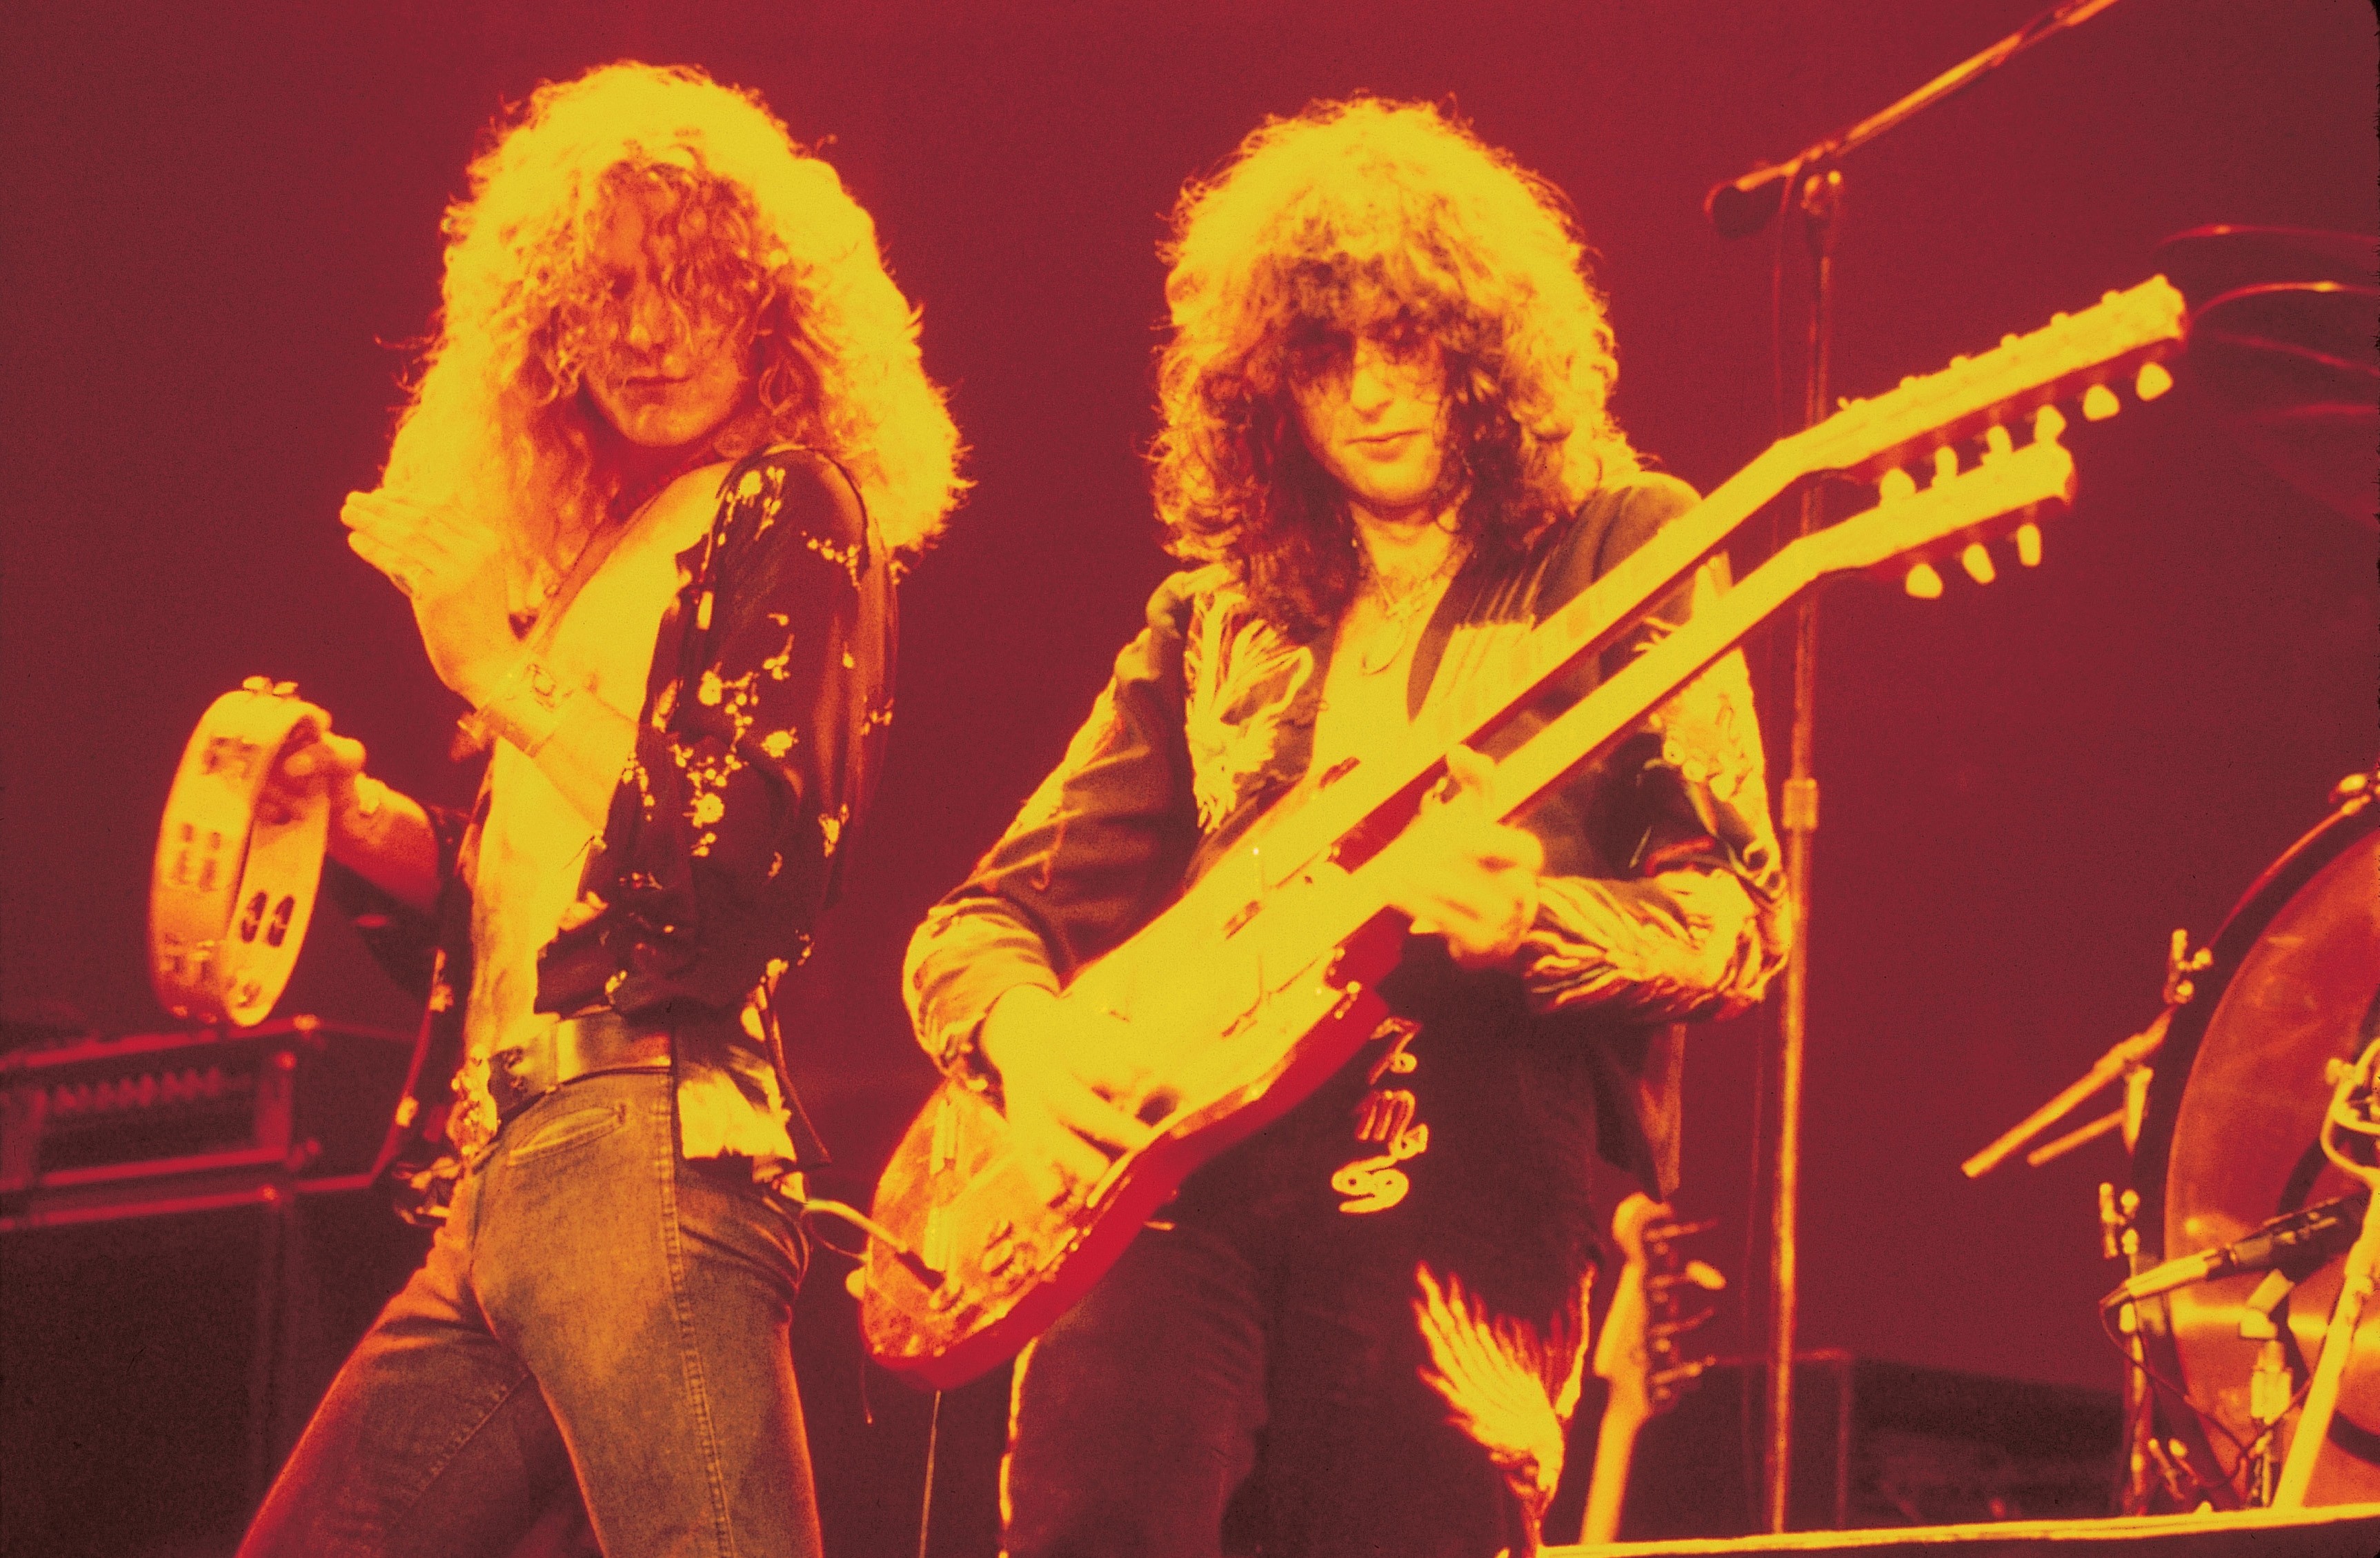 People 3450x2259 music men long hair guitar musical instrument Led Zeppelin Robert Plant Jimmy Page band